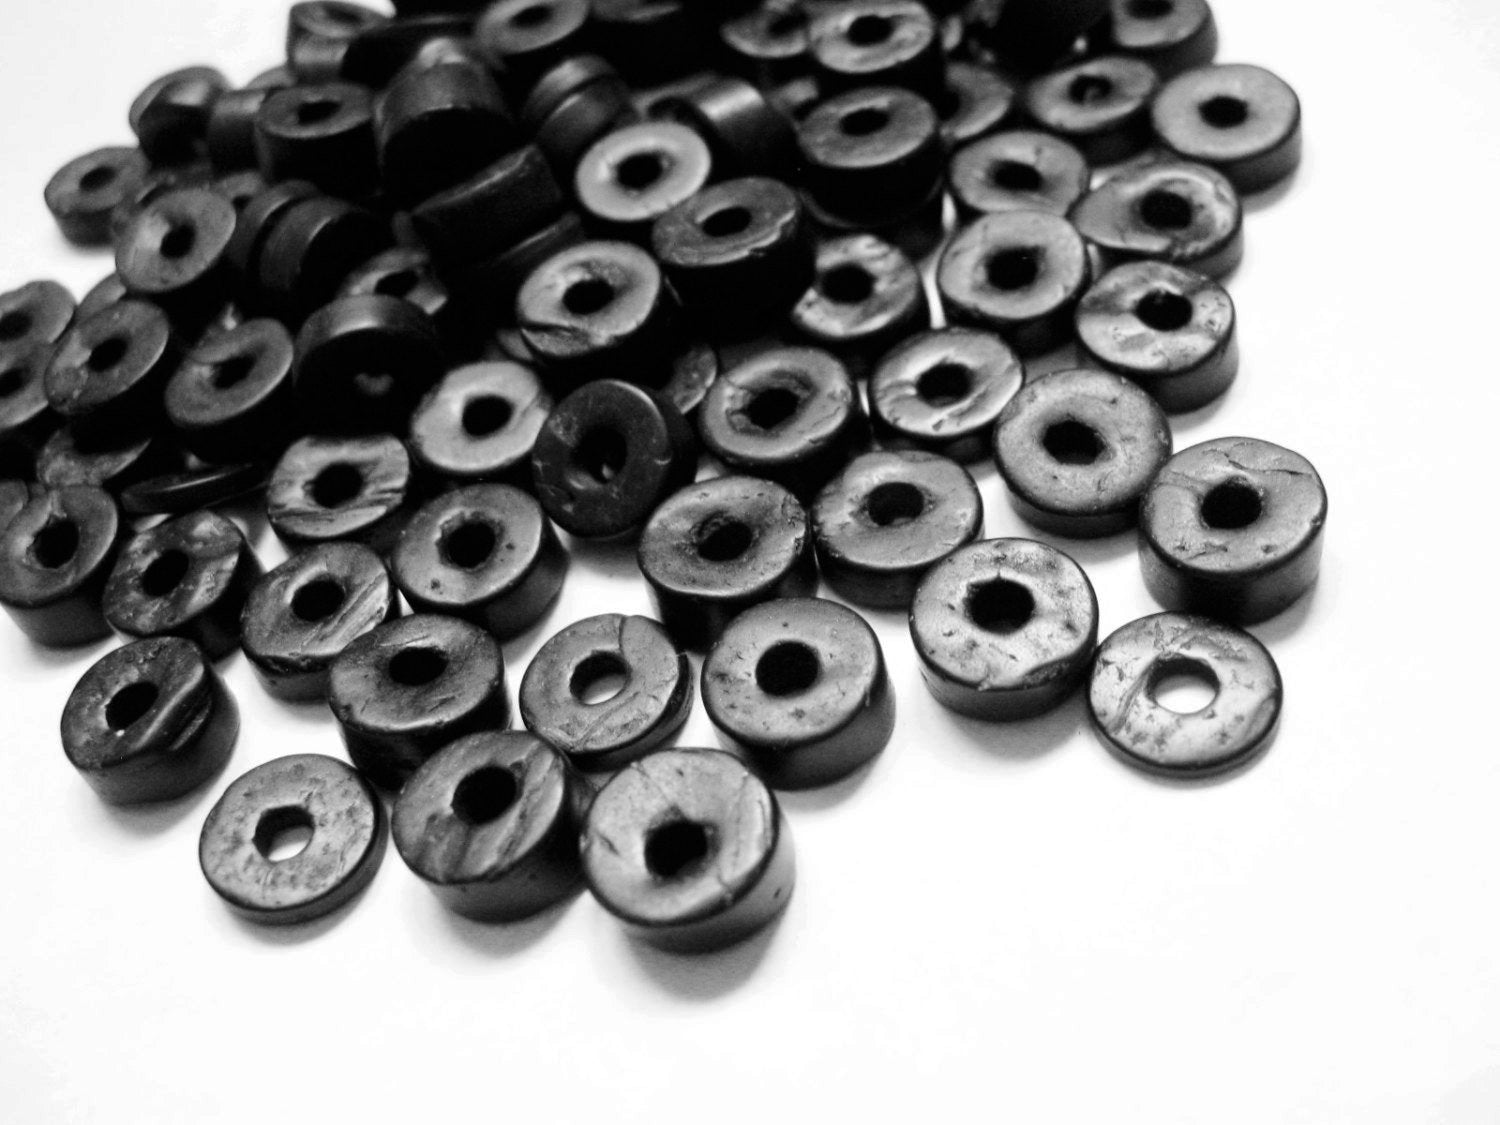 Black Coconut Bead - 100 Eco Friendly Donuts Rondelle Disk Beads 9mm